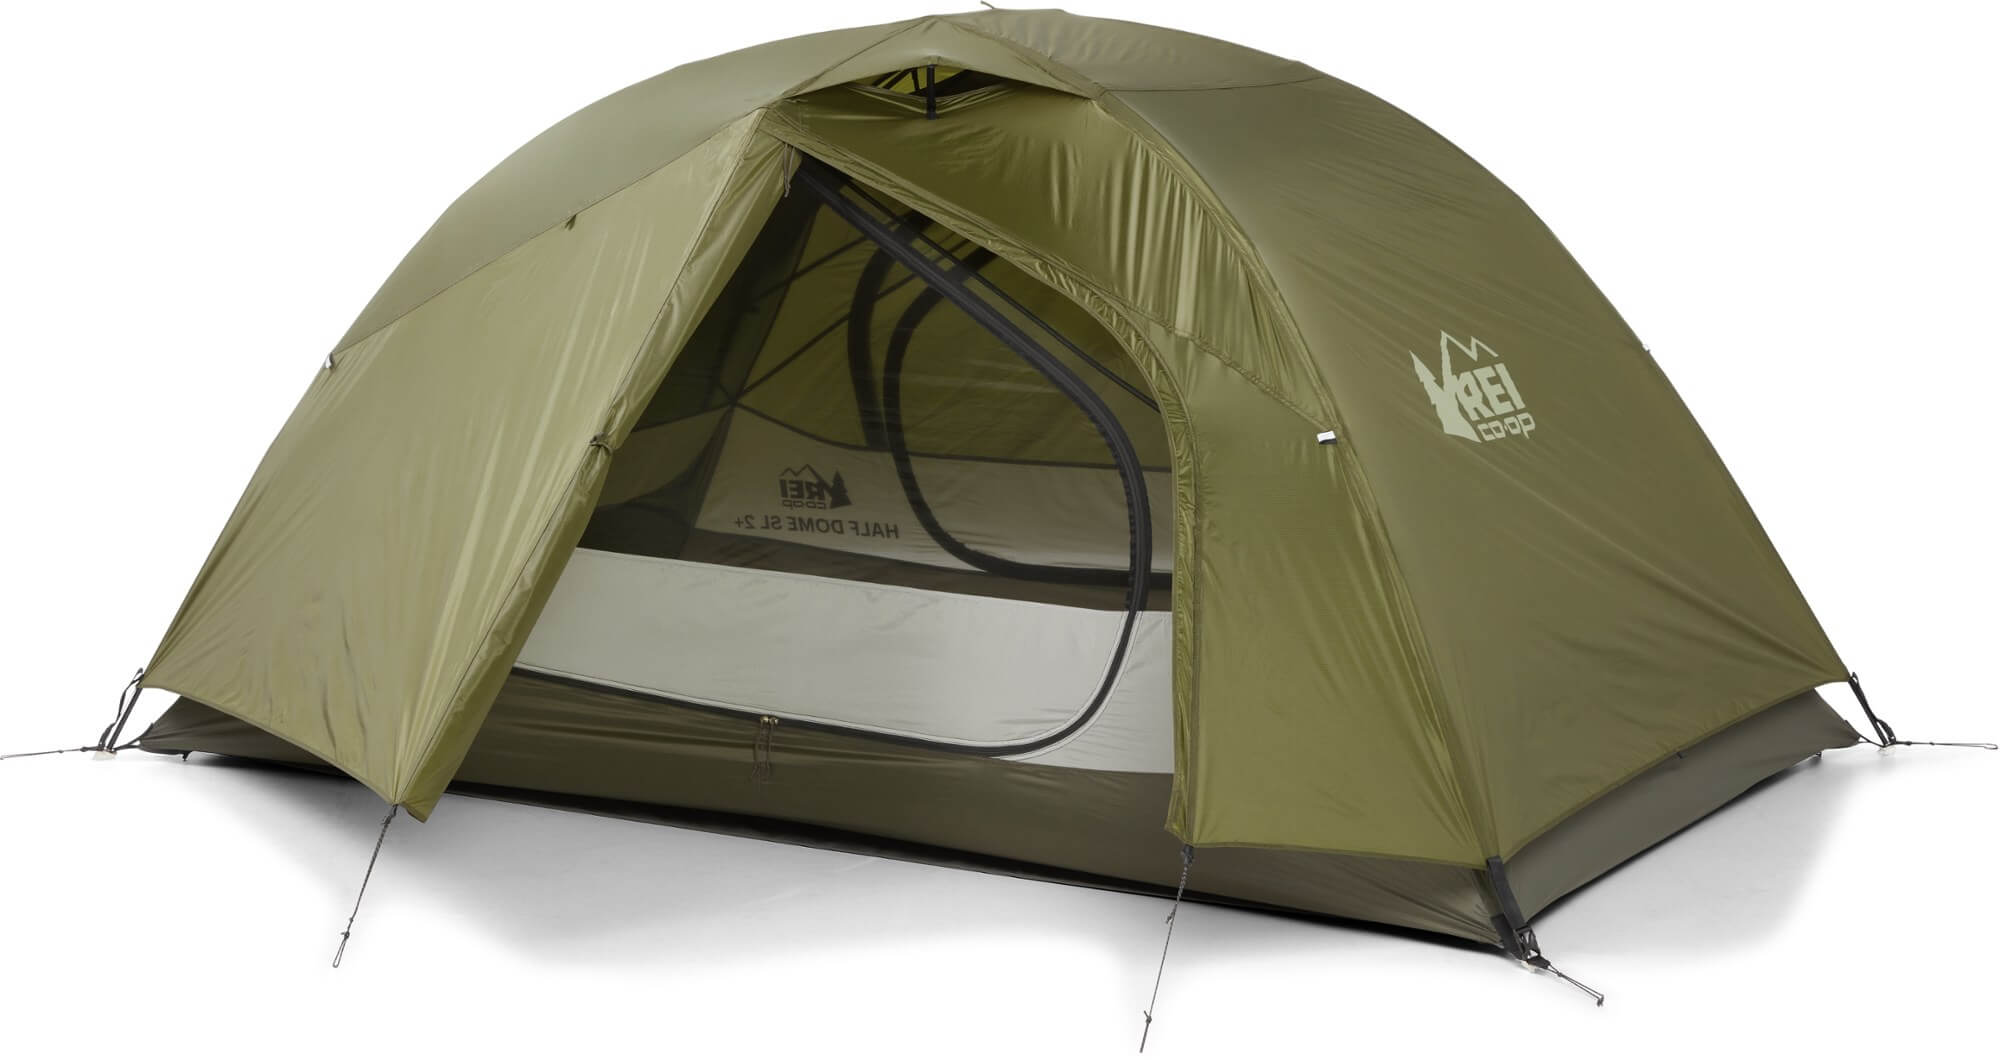 REI Co-op Half Dome SL 2+ Tent with Footprint